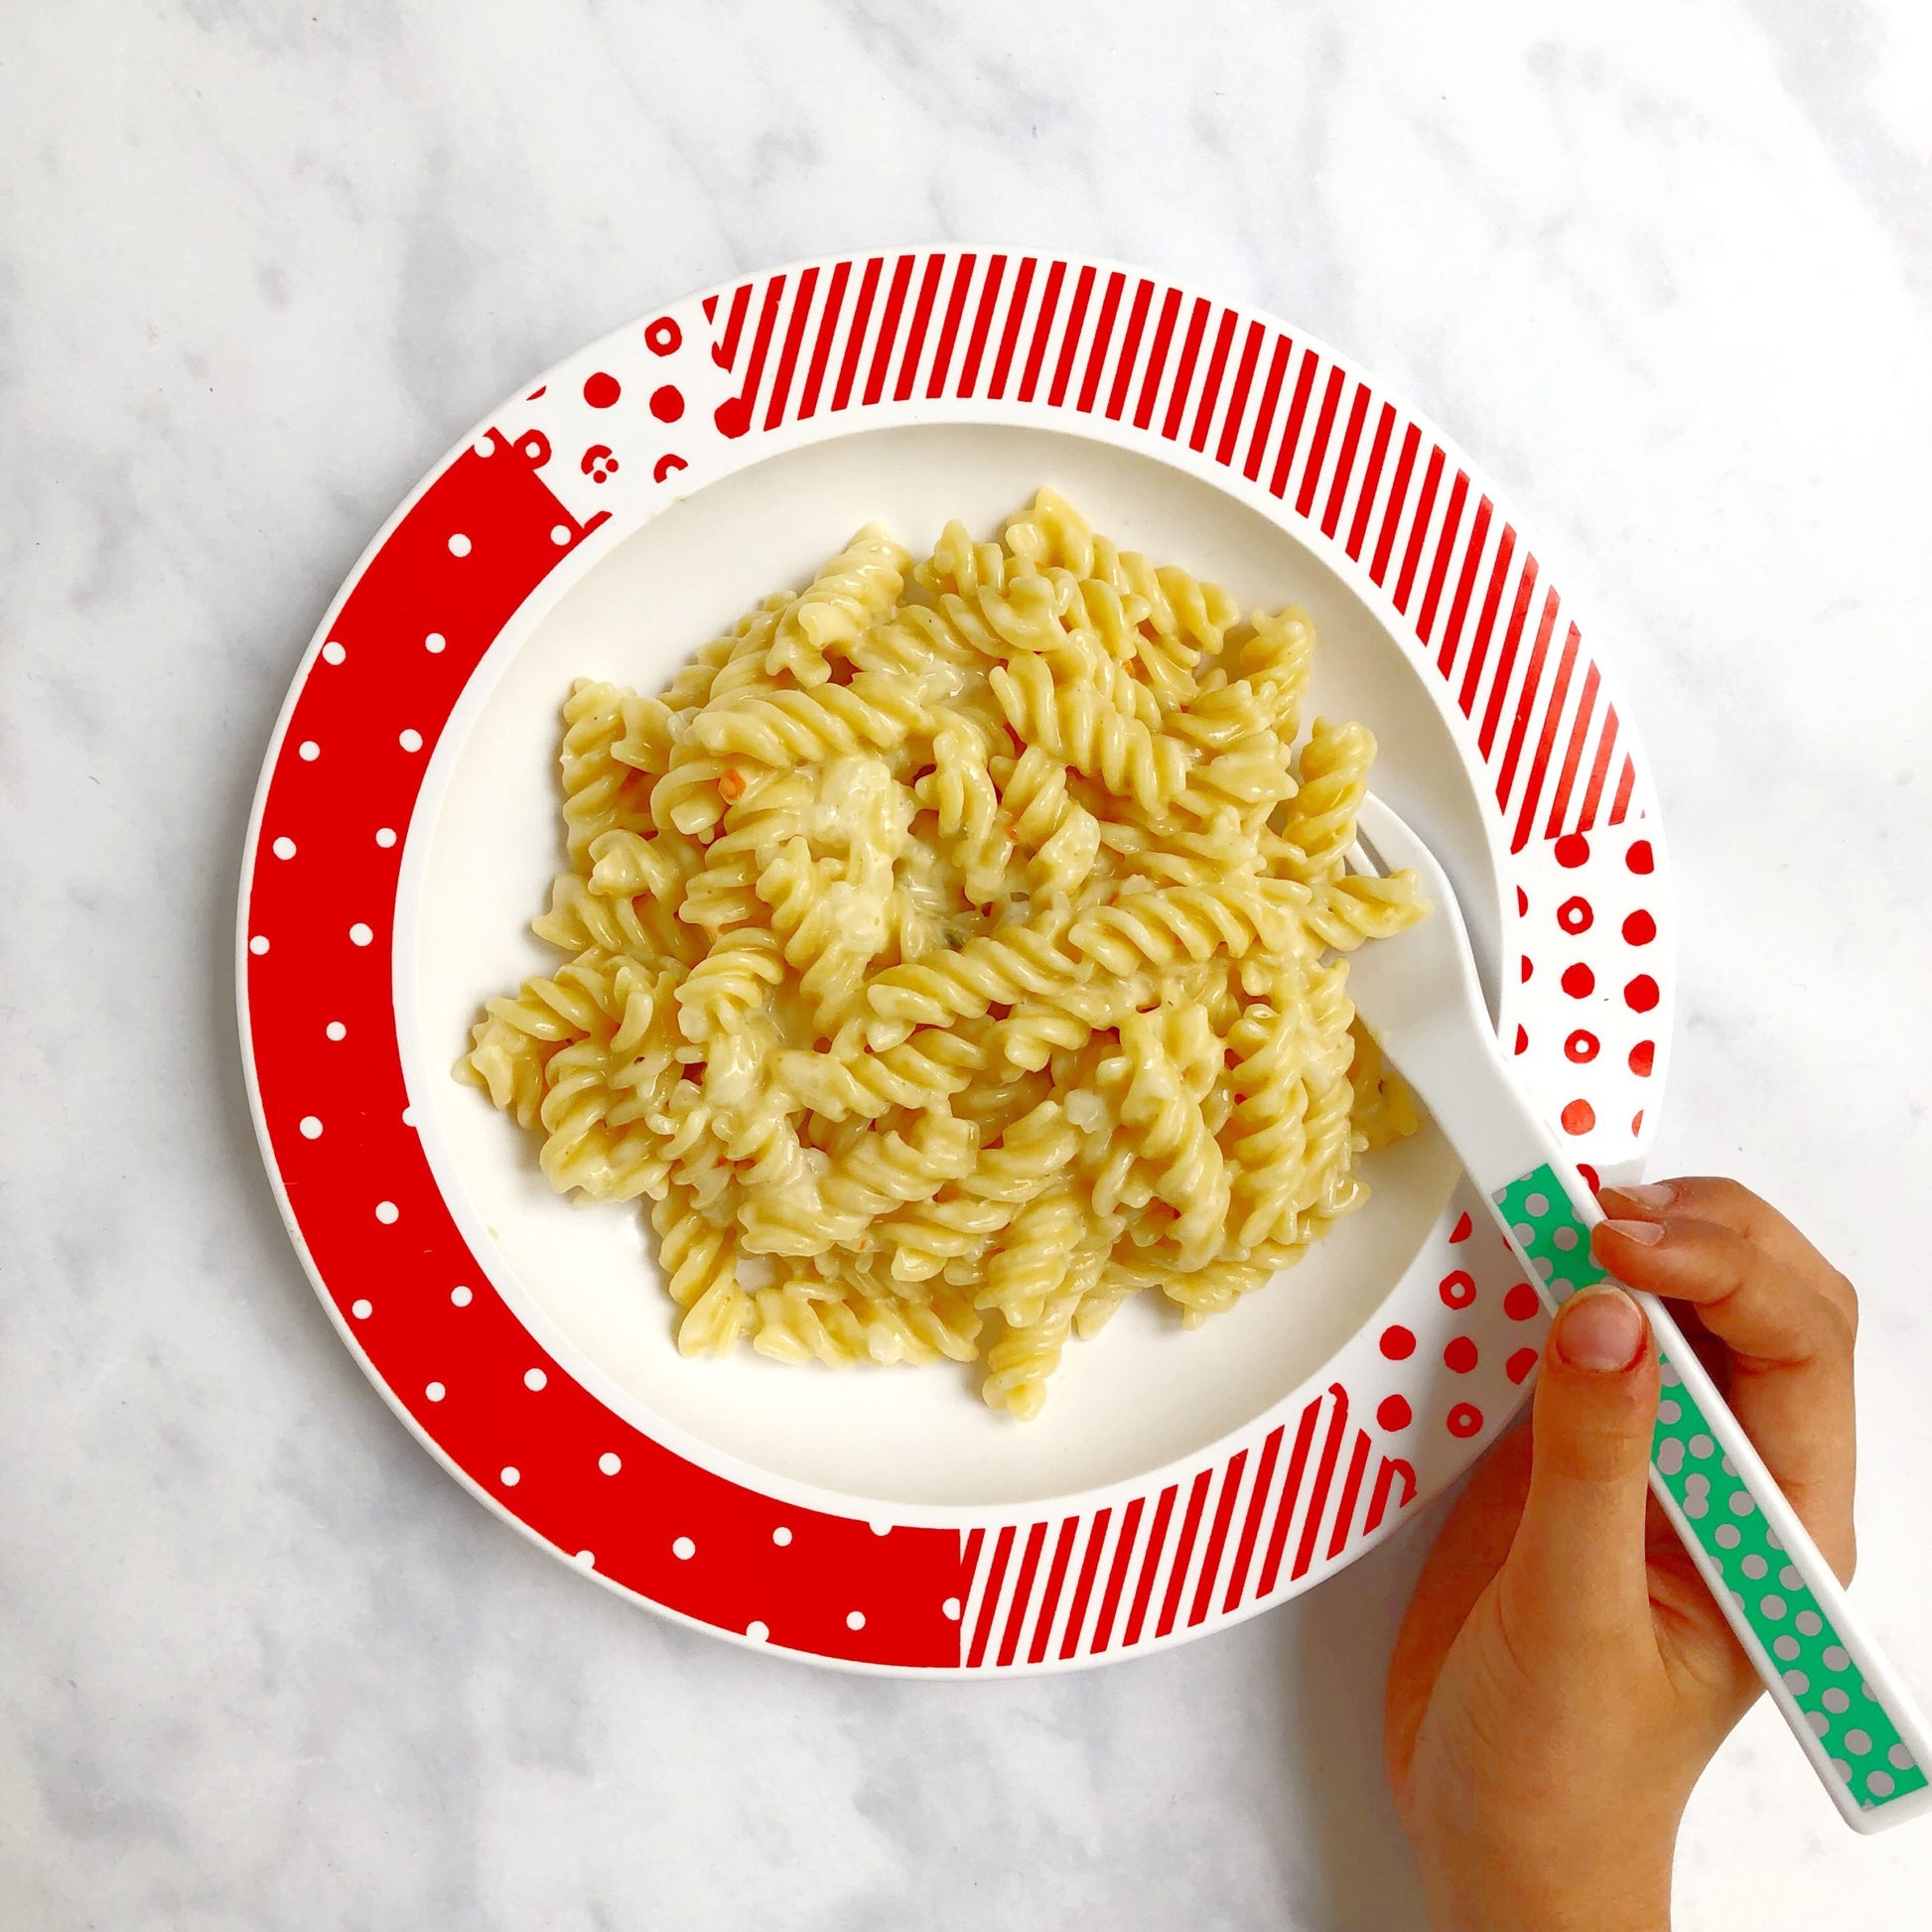 red and white patterned children's plate with a portion of pasta and a child holding a fork in the pasta